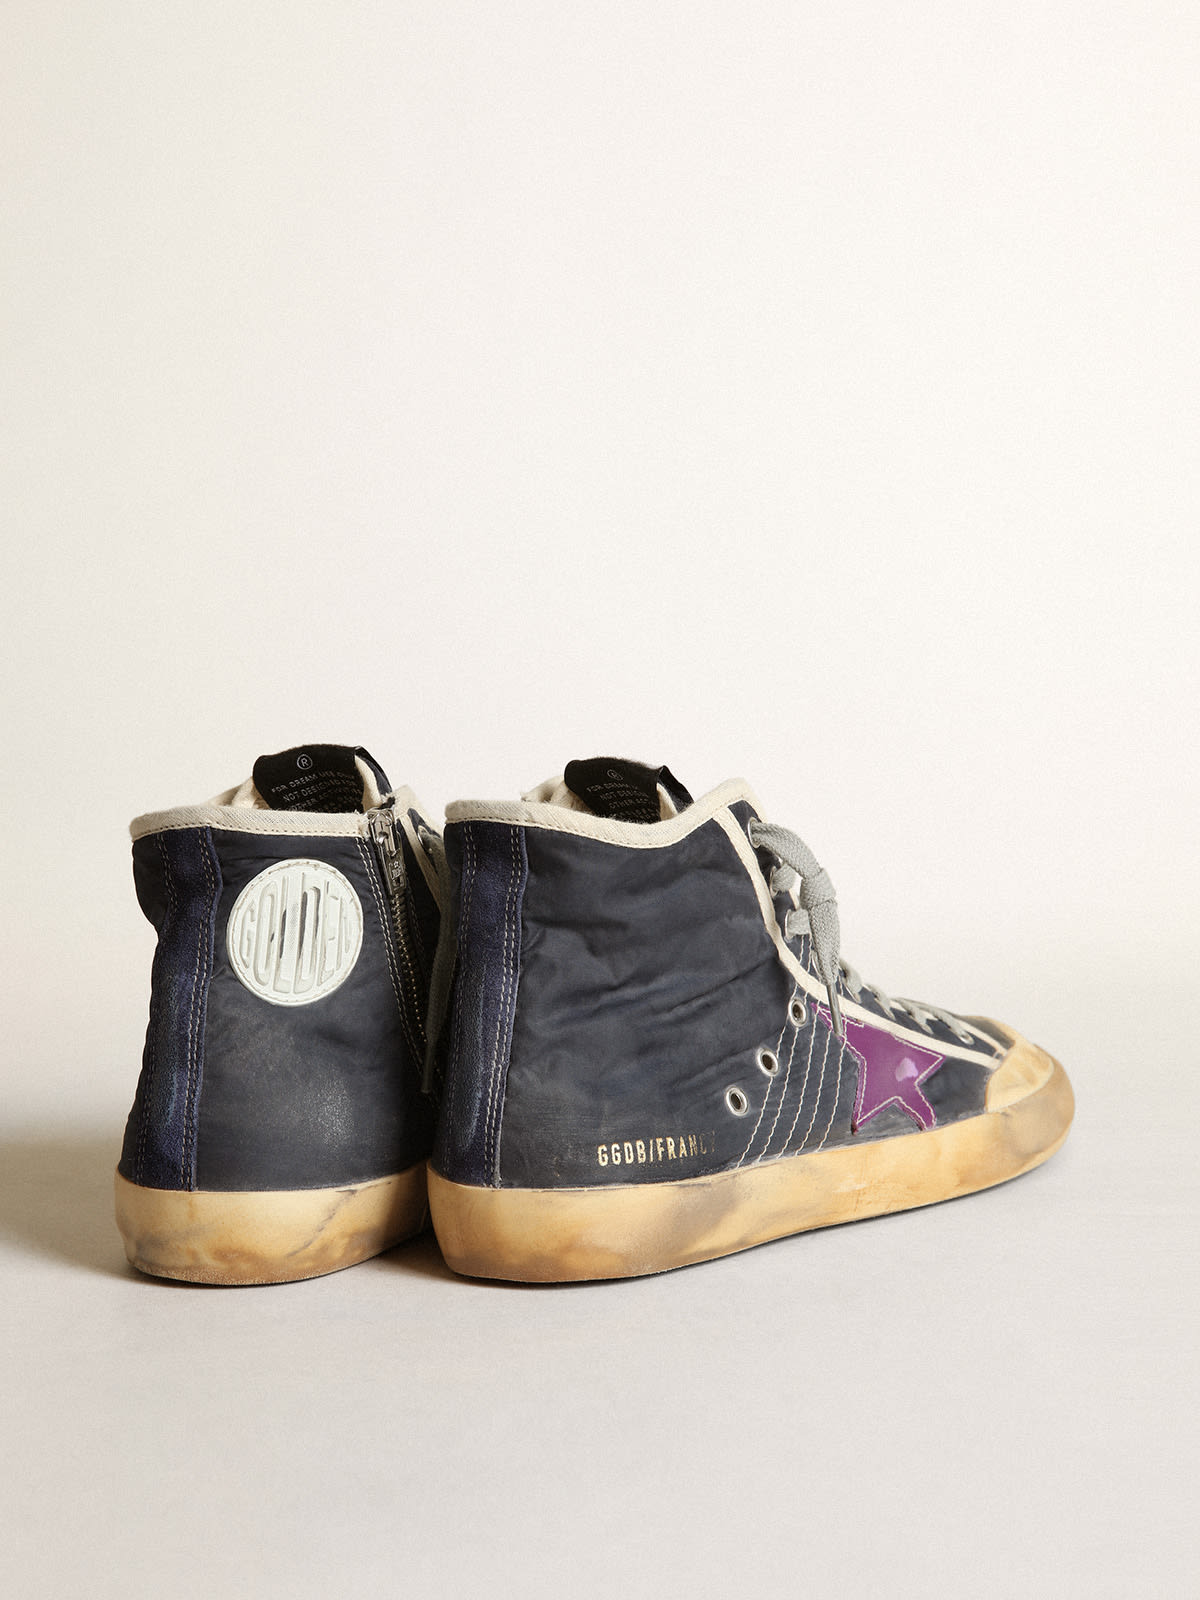 Golden Goose - Francy Penstar sneakers in navy-blue nylon with purple leather star and black suede heel tab in 